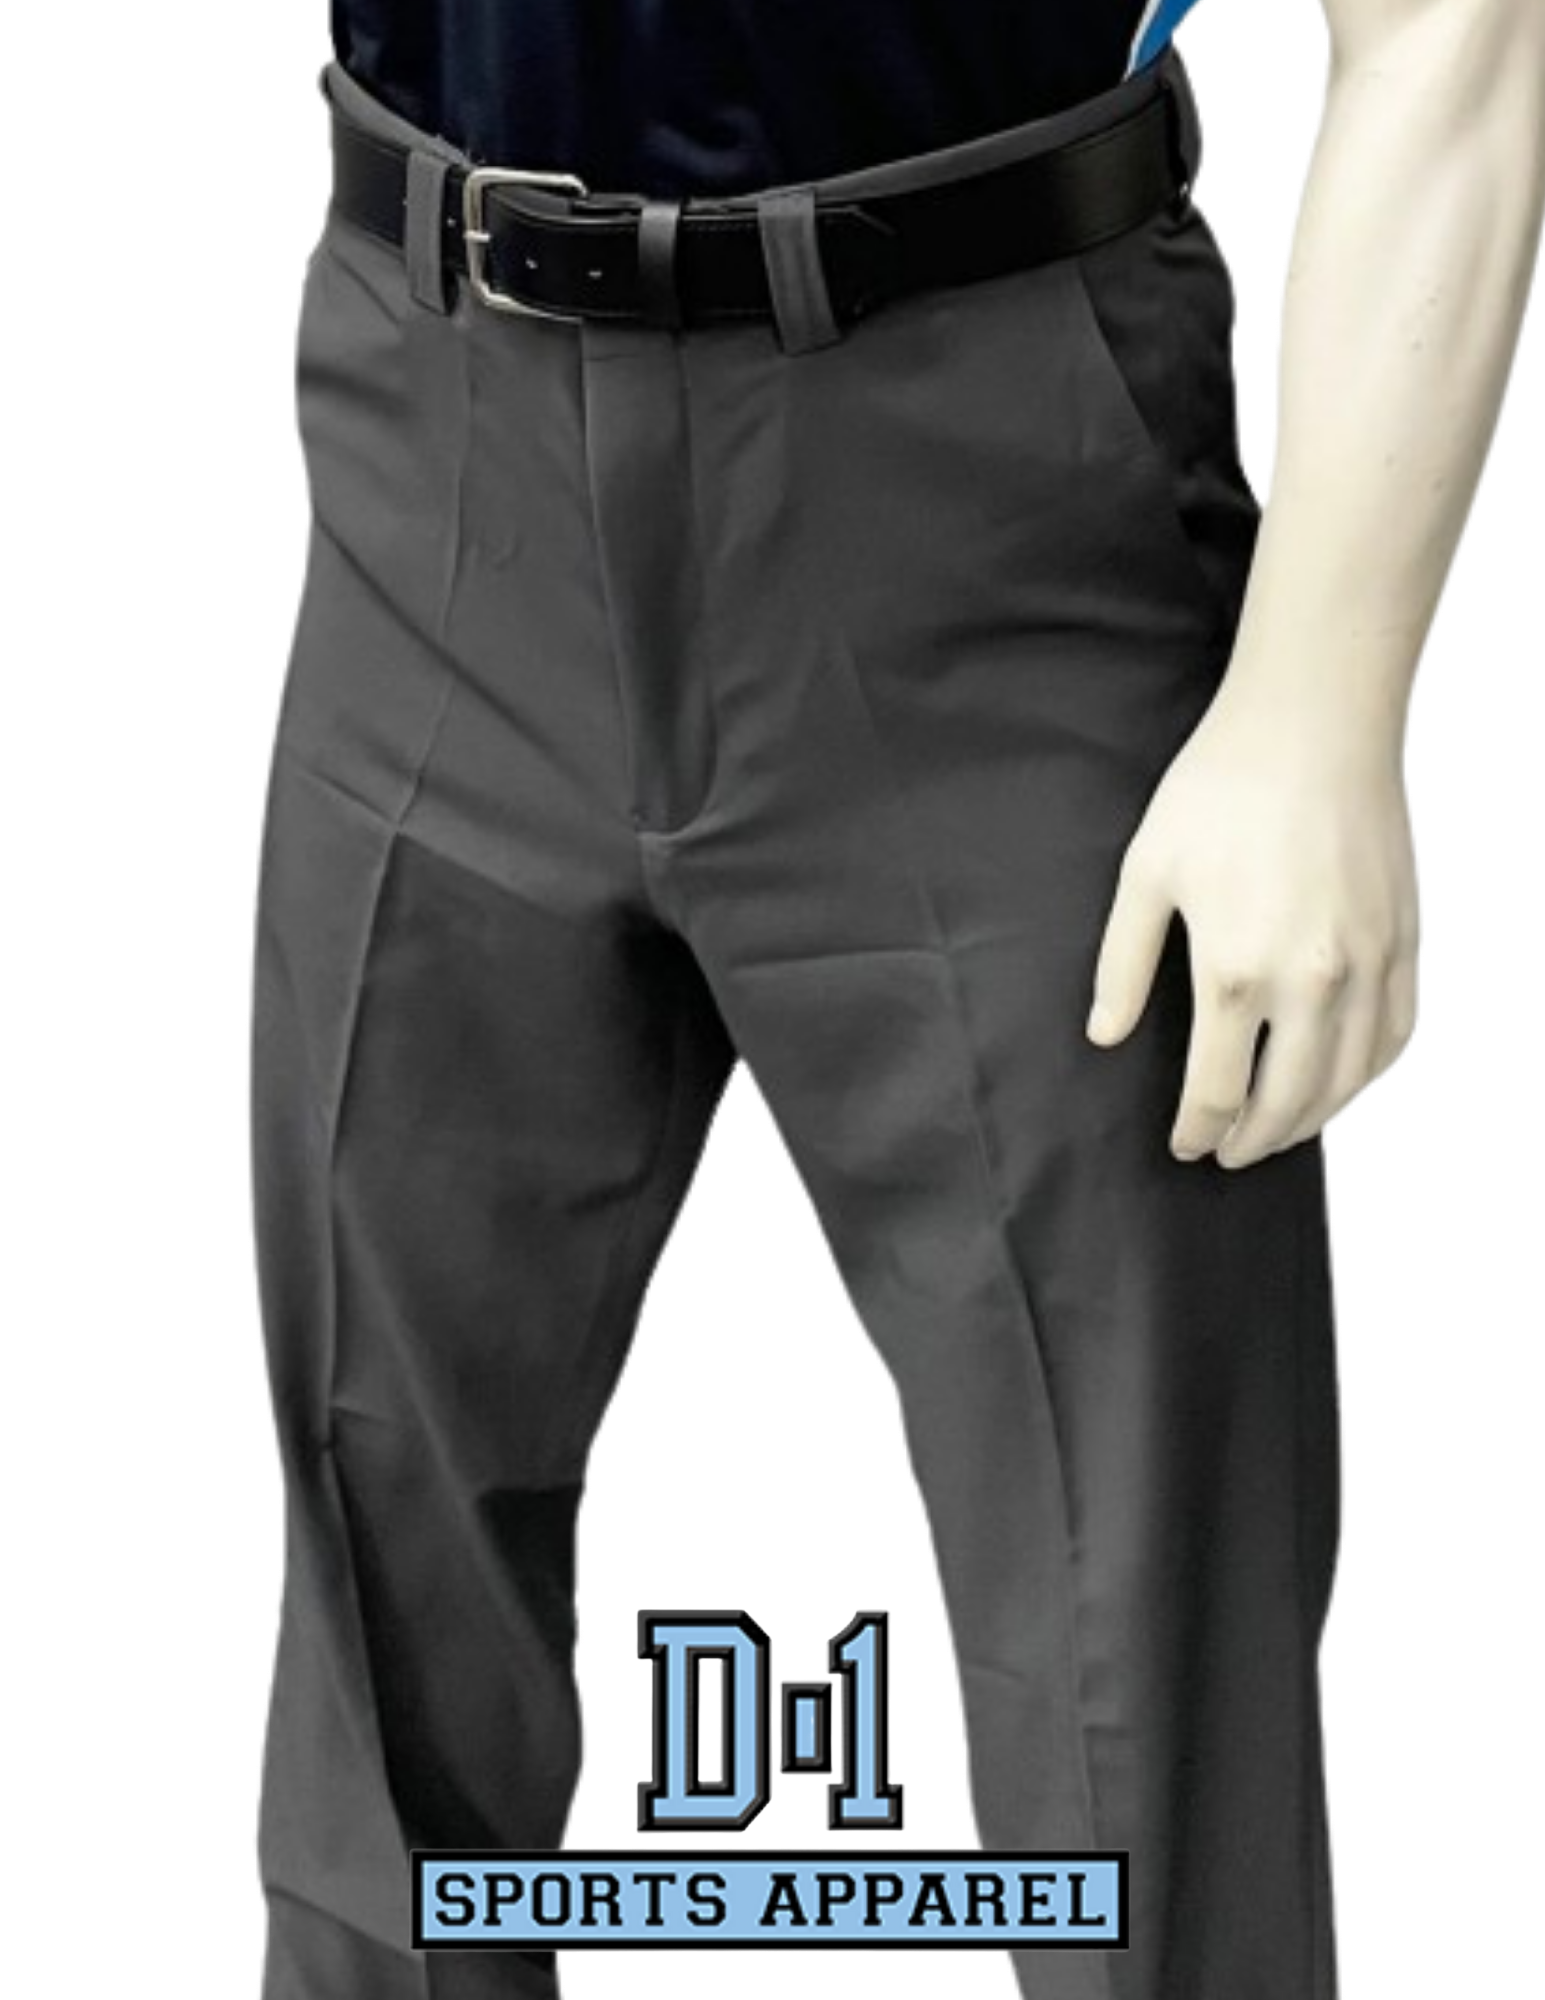 NCAA Men's 4-Way Stretch flat front PLATE pant EXPANDER WAISTBAND - Charcoal Grey